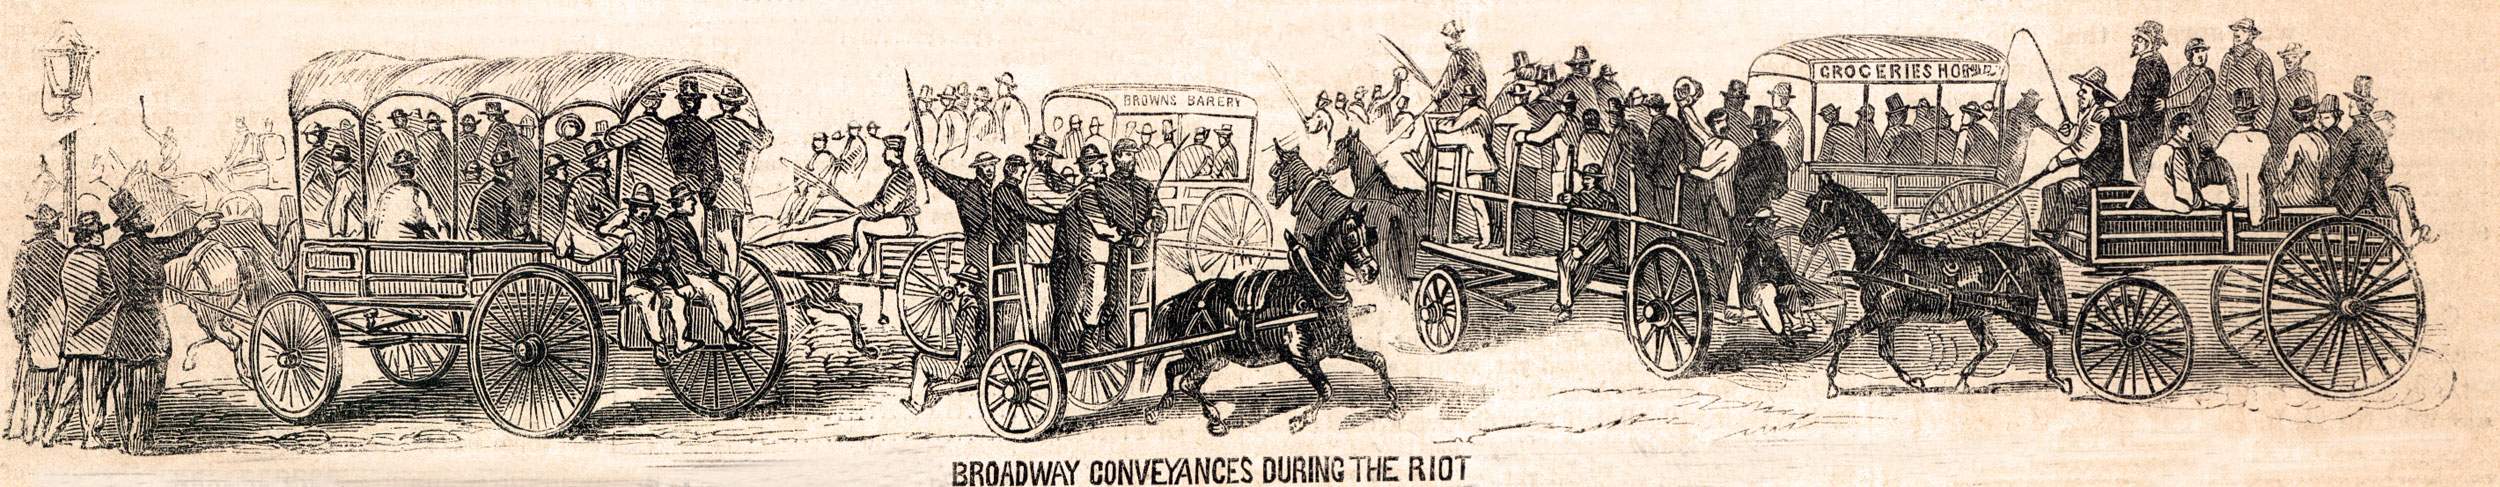 Rioters using transport on Broadway, New York City, July, 1863, artist's impression, zoomable image